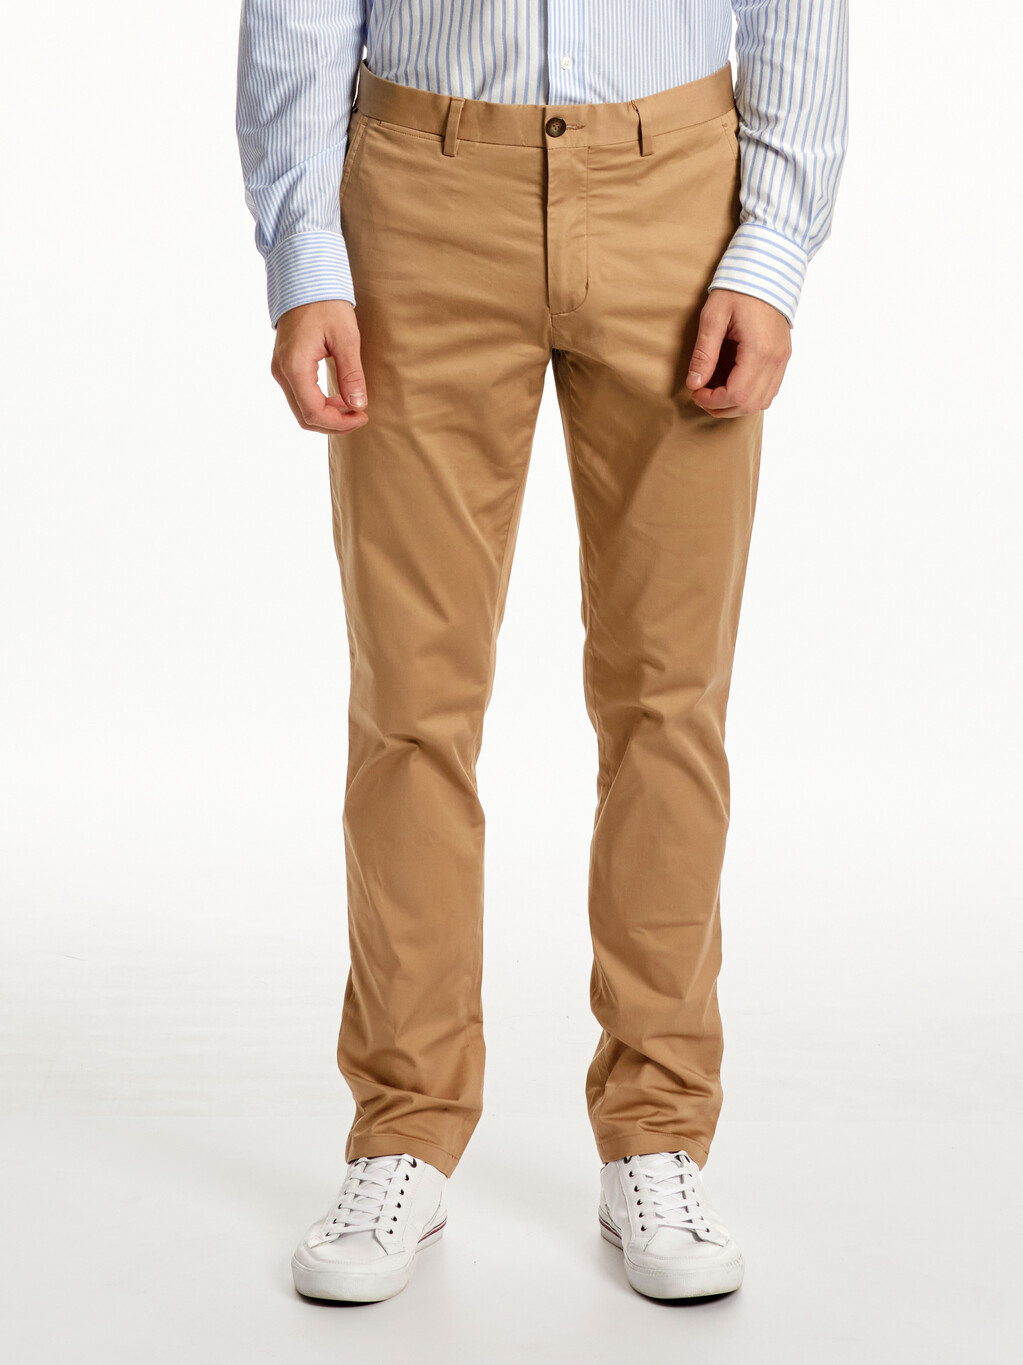 Denton Chino Straight Fit Stretch Pants, Beige, hi-res